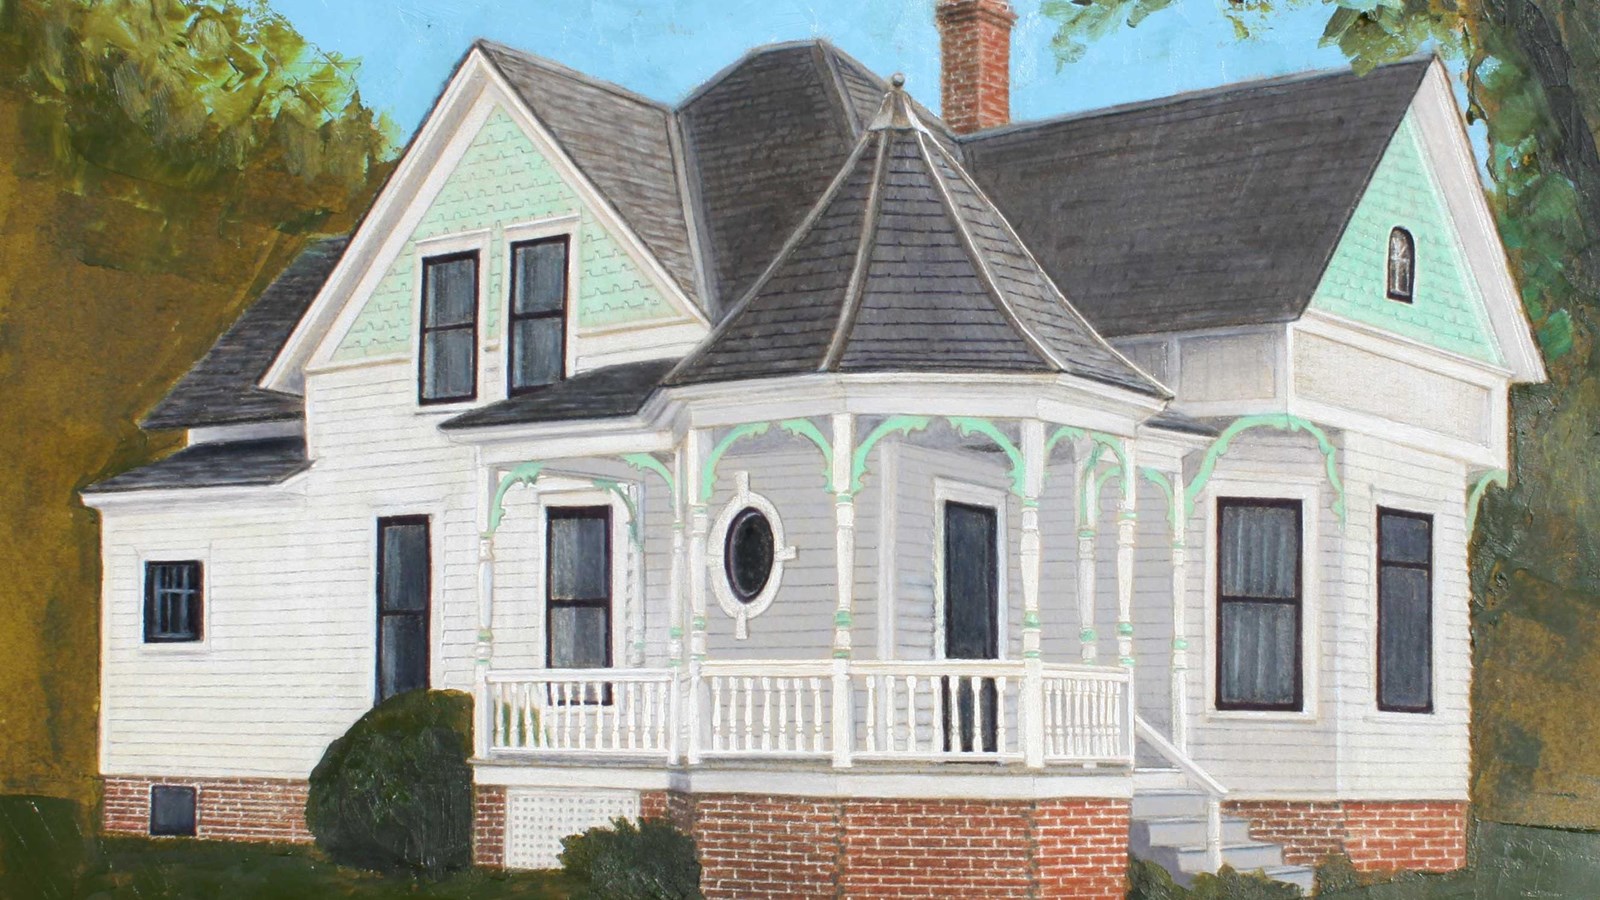 A painting depicts a white and blue house with a big porch and a round pointed roof.